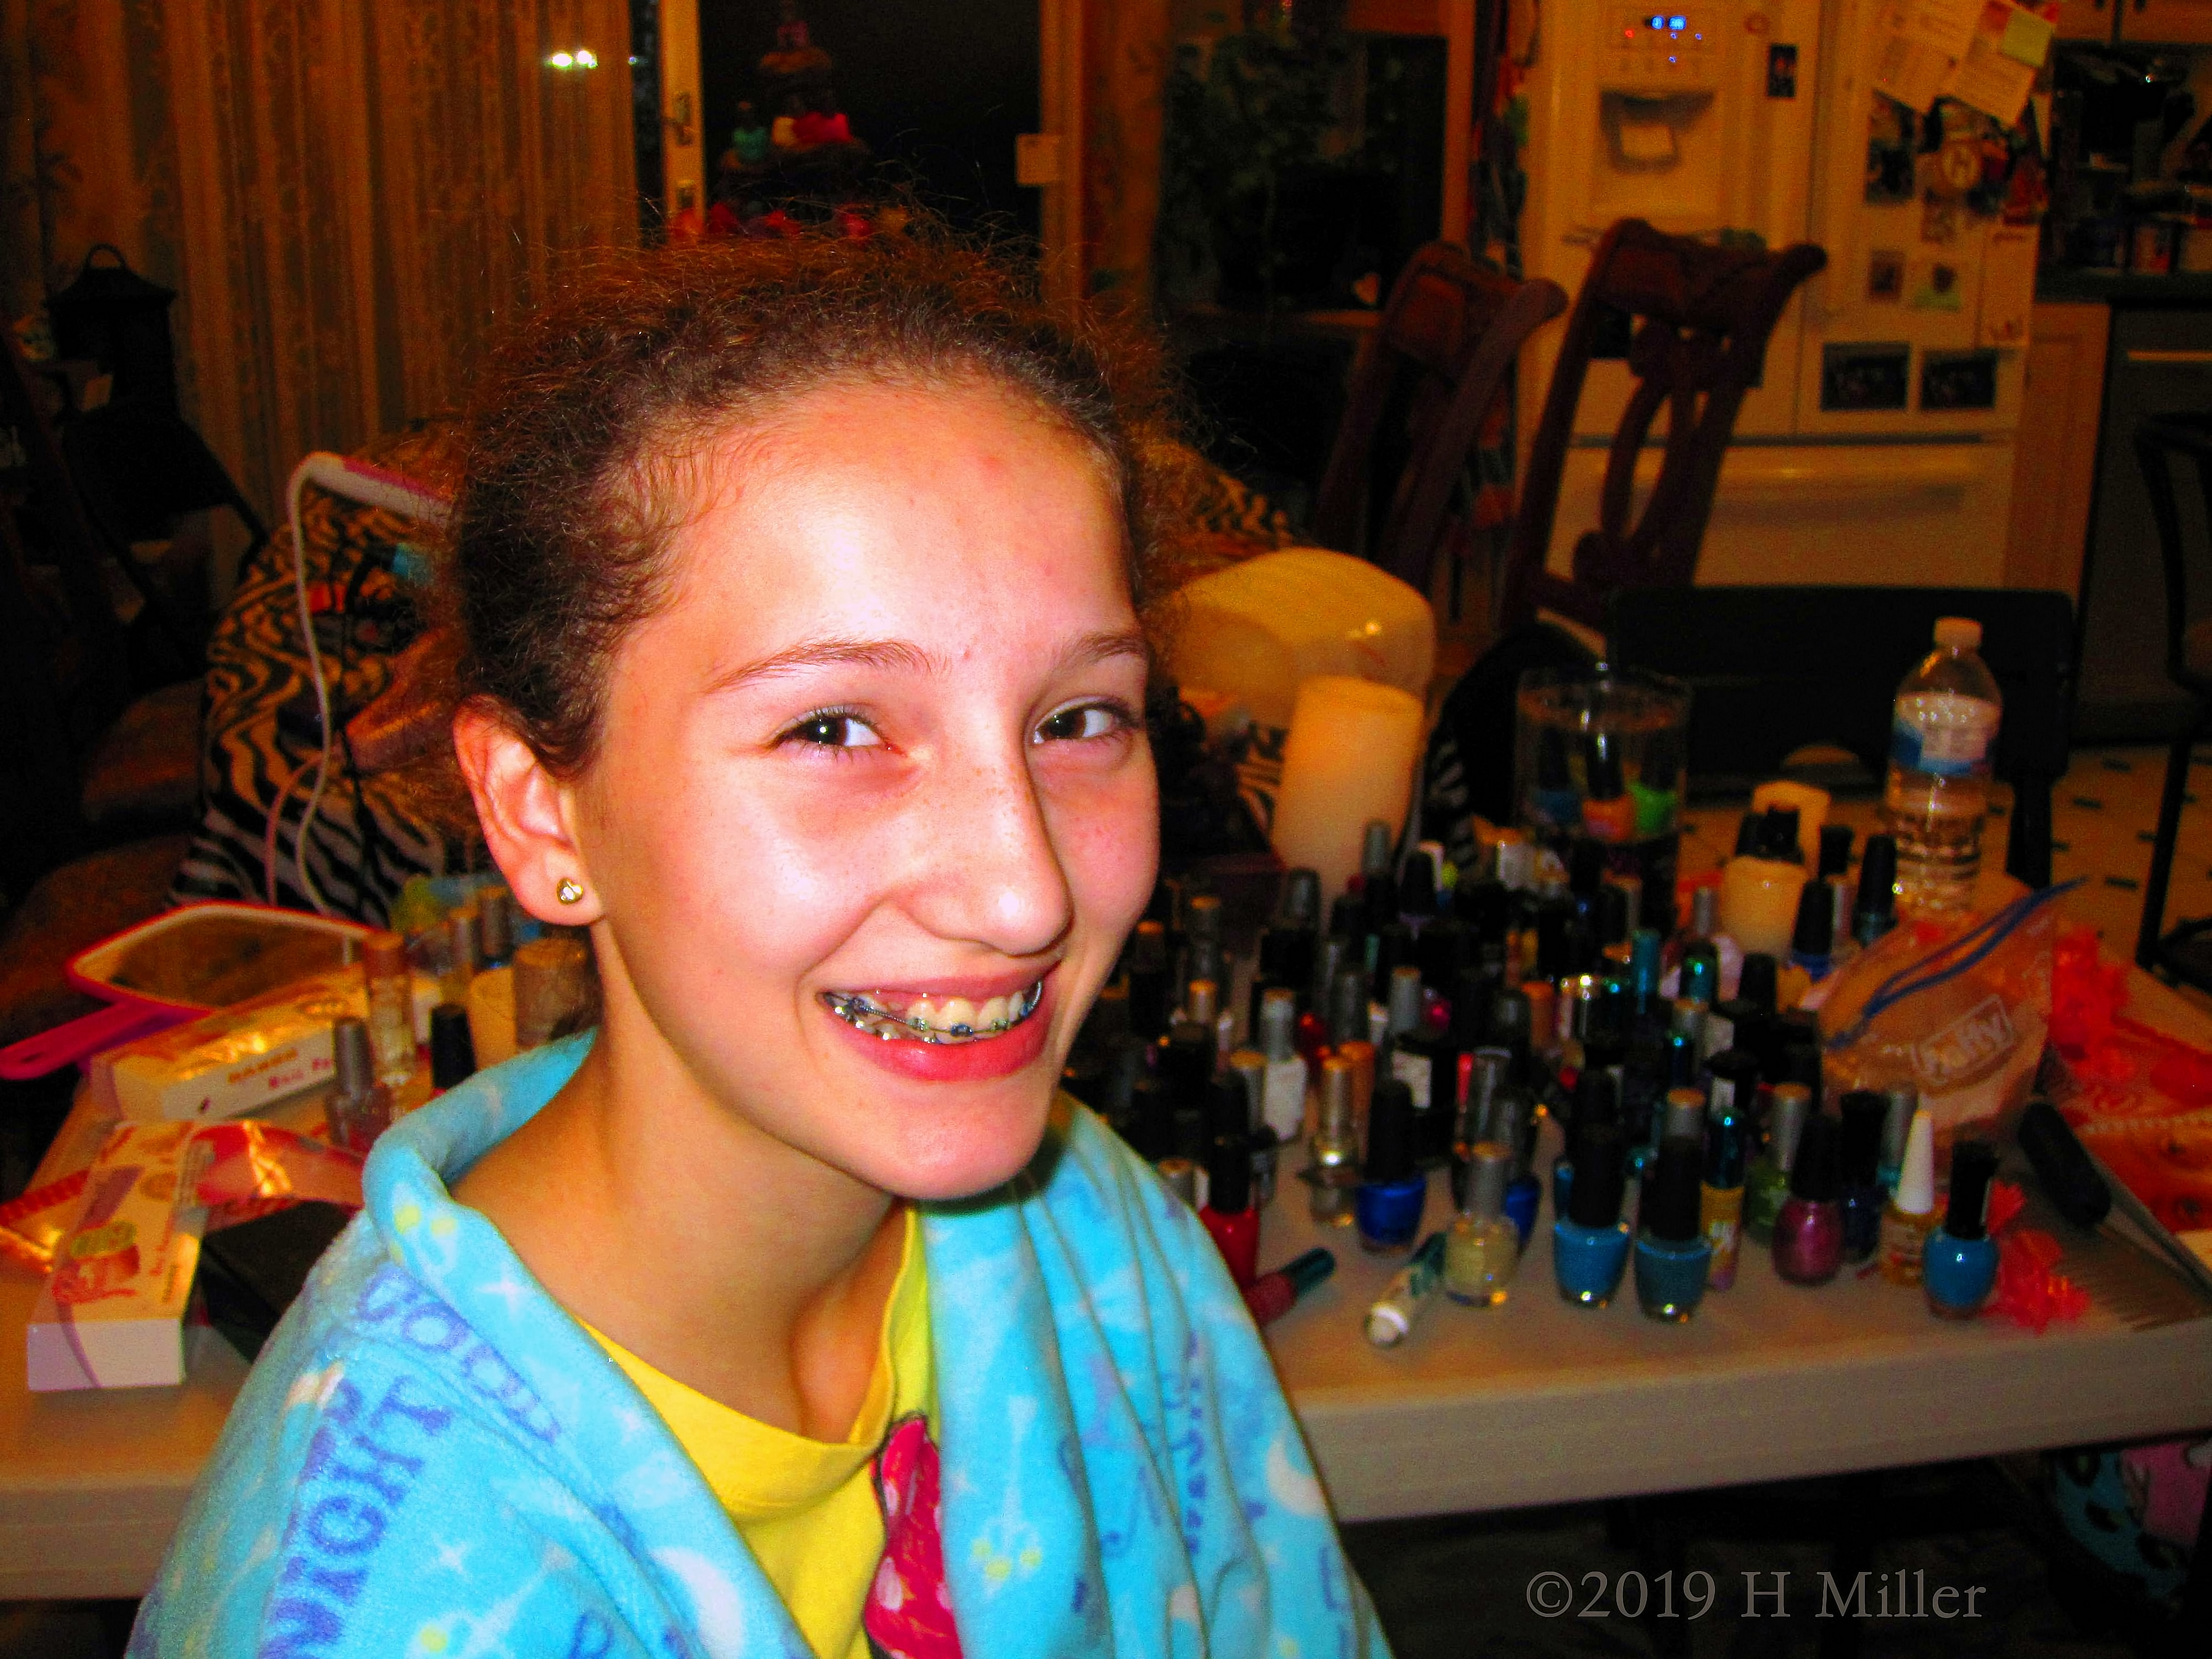 Kids Spa Party For Jillian In New Jersey In October 2014 Gallery 2